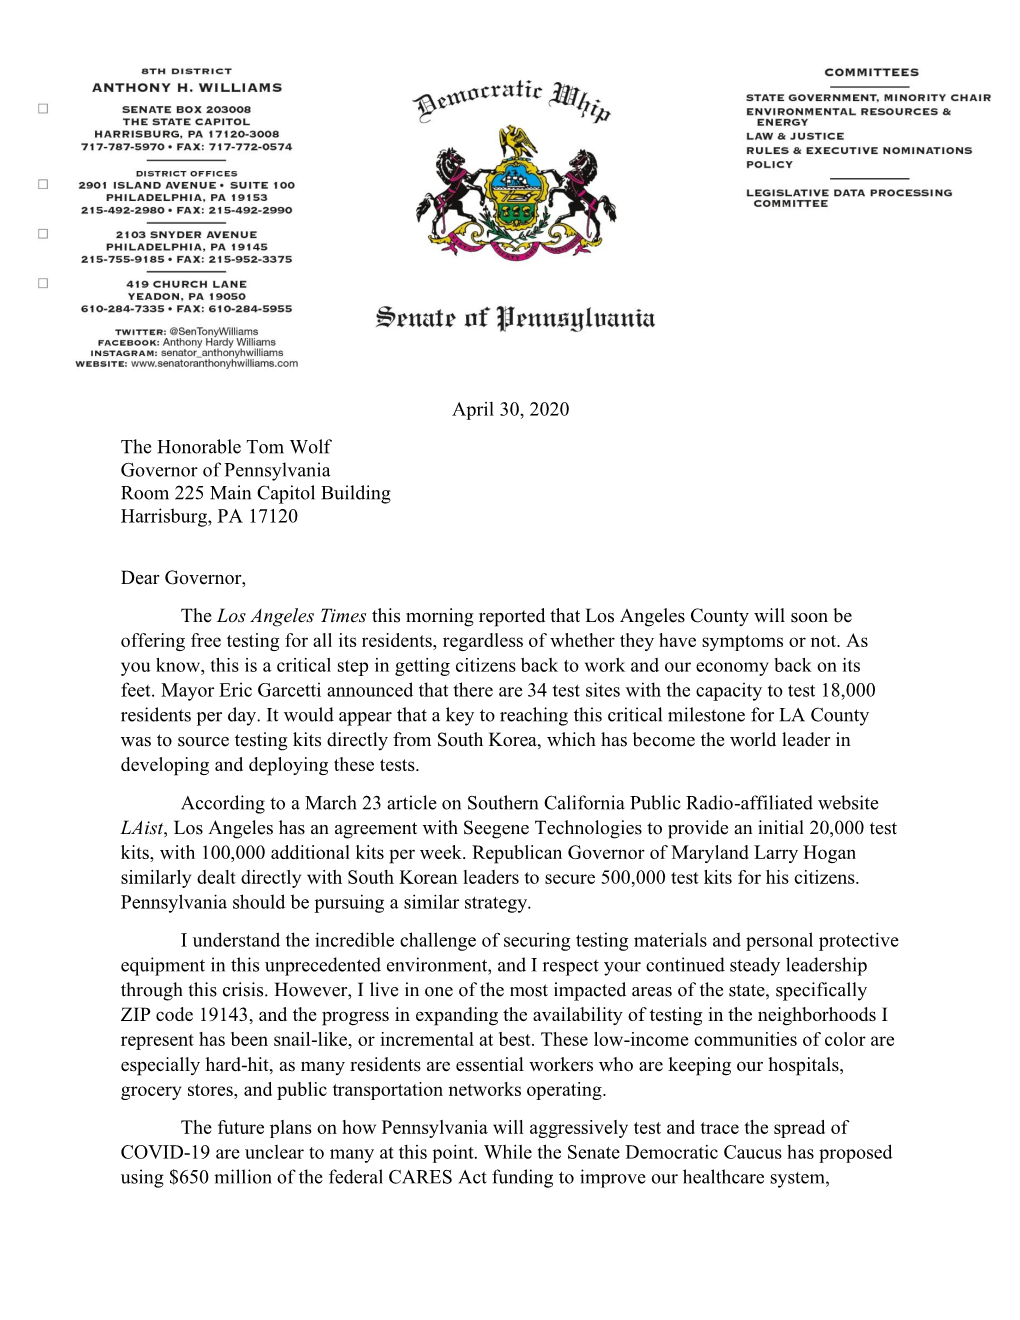 Letter to Governor Tom Wolf